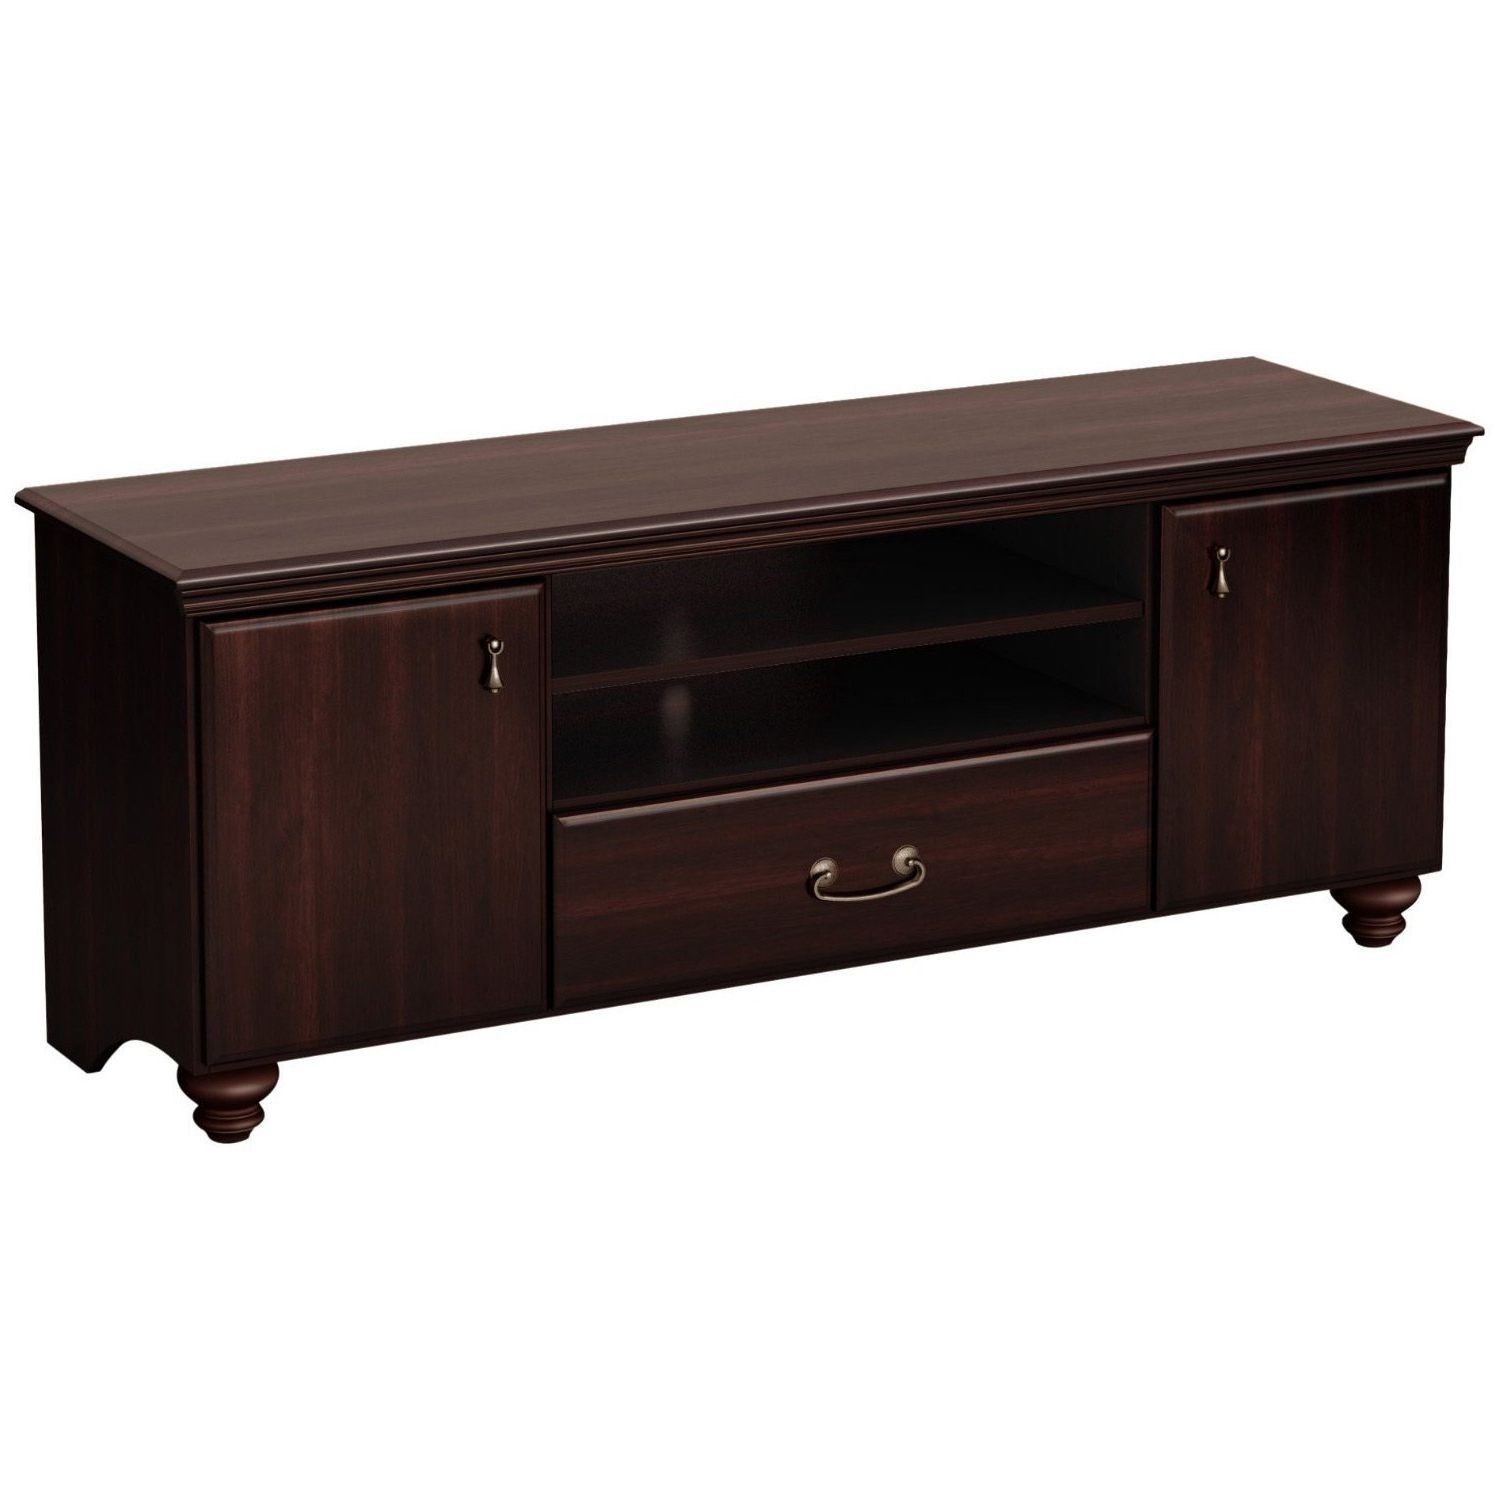 Traditional Style Tv Stand In Dark Mahogany Finish – Fits Tvs Up To In Popular Mahogany Tv Stands (View 14 of 20)